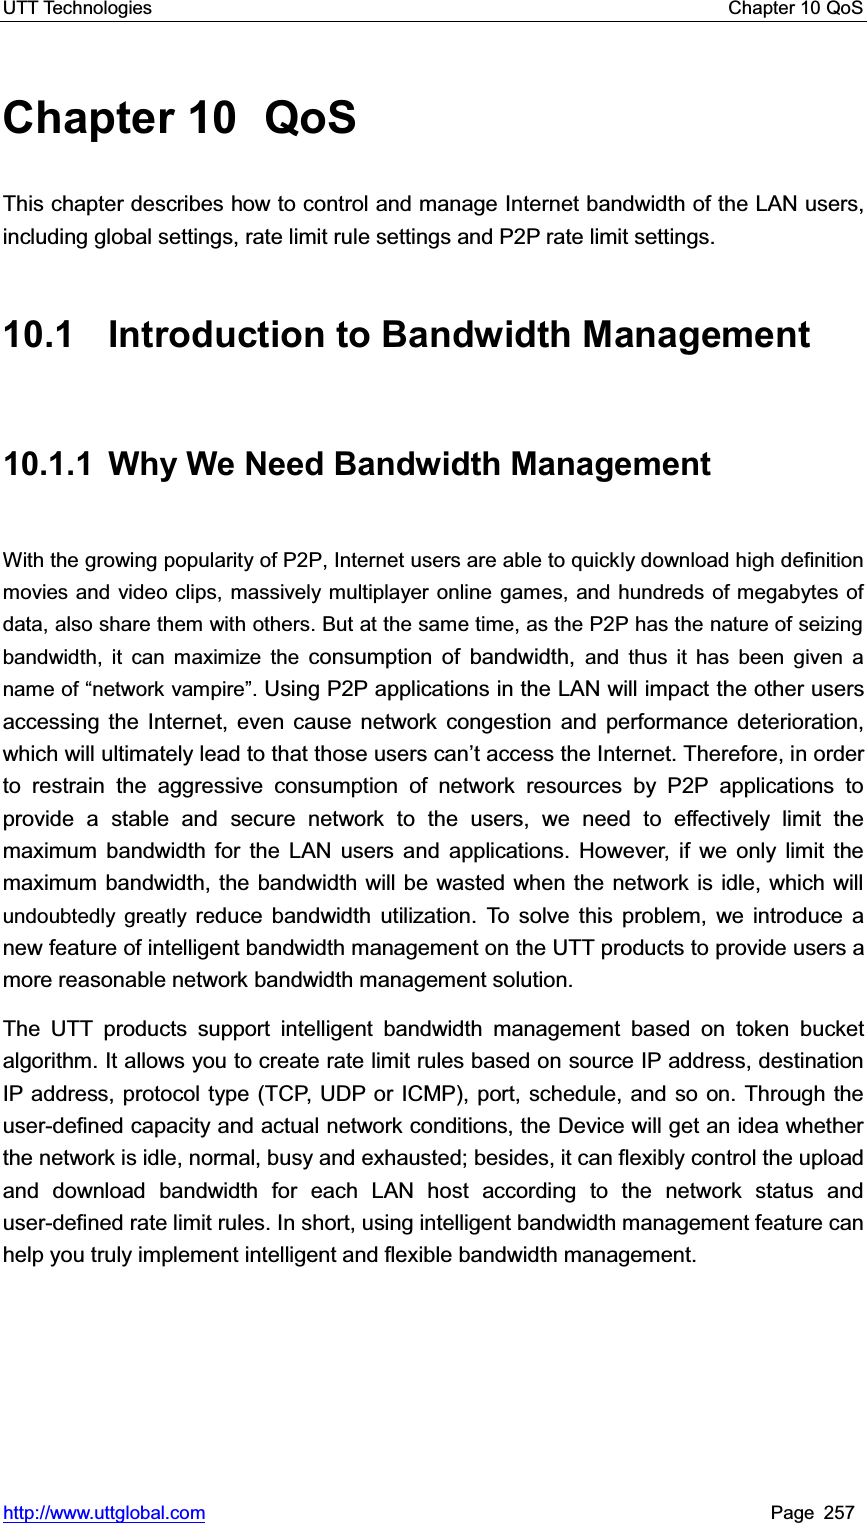 UTT Technologies    Chapter 10 QoS   http://www.uttglobal.com Page 257 Chapter 10  QoS This chapter describes how to control and manage Internet bandwidth of the LAN users, including global settings, rate limit rule settings and P2P rate limit settings. 10.1  Introduction to Bandwidth Management 10.1.1  Why We Need Bandwidth Management With the growing popularity of P2P, Internet users are able to quickly download high definition movies and video clips, massively multiplayer online games, and hundreds of megabytes of data, also share them with others. But at the same time, as the P2P has the nature of seizing bandwidth, it can maximize the consumption of bandwidth, and thus it has been given a name of ³network vampire´.Using P2P applications in the LAN will impact the other users accessing the Internet, even cause network congestion and performance deterioration, which will ultimately lead to that those users can¶t access the Internet. Therefore, in order to restrain the aggressive consumption of network resources by P2P applications to provide a stable and secure network to the users, we need to effectively limit the maximum bandwidth for the LAN users and applications. However, if we only limit the maximum bandwidth, the bandwidth will be wasted when the network is idle, which will undoubtedly greatly reduce bandwidth utilization. To solve this problem, we introduce a new feature of intelligent bandwidth management on the UTT products to provide users a more reasonable network bandwidth management solution. The UTT products support intelligent bandwidth management based on token bucket algorithm. It allows you to create rate limit rules based on source IP address, destination IP address, protocol type (TCP, UDP or ICMP), port, schedule, and so on. Through the user-defined capacity and actual network conditions, the Device will get an idea whether the network is idle, normal, busy and exhausted; besides, it can flexibly control the upload and download bandwidth for each LAN host according to the network status and user-defined rate limit rules. In short, using intelligent bandwidth management feature can help you truly implement intelligent and flexible bandwidth management. 